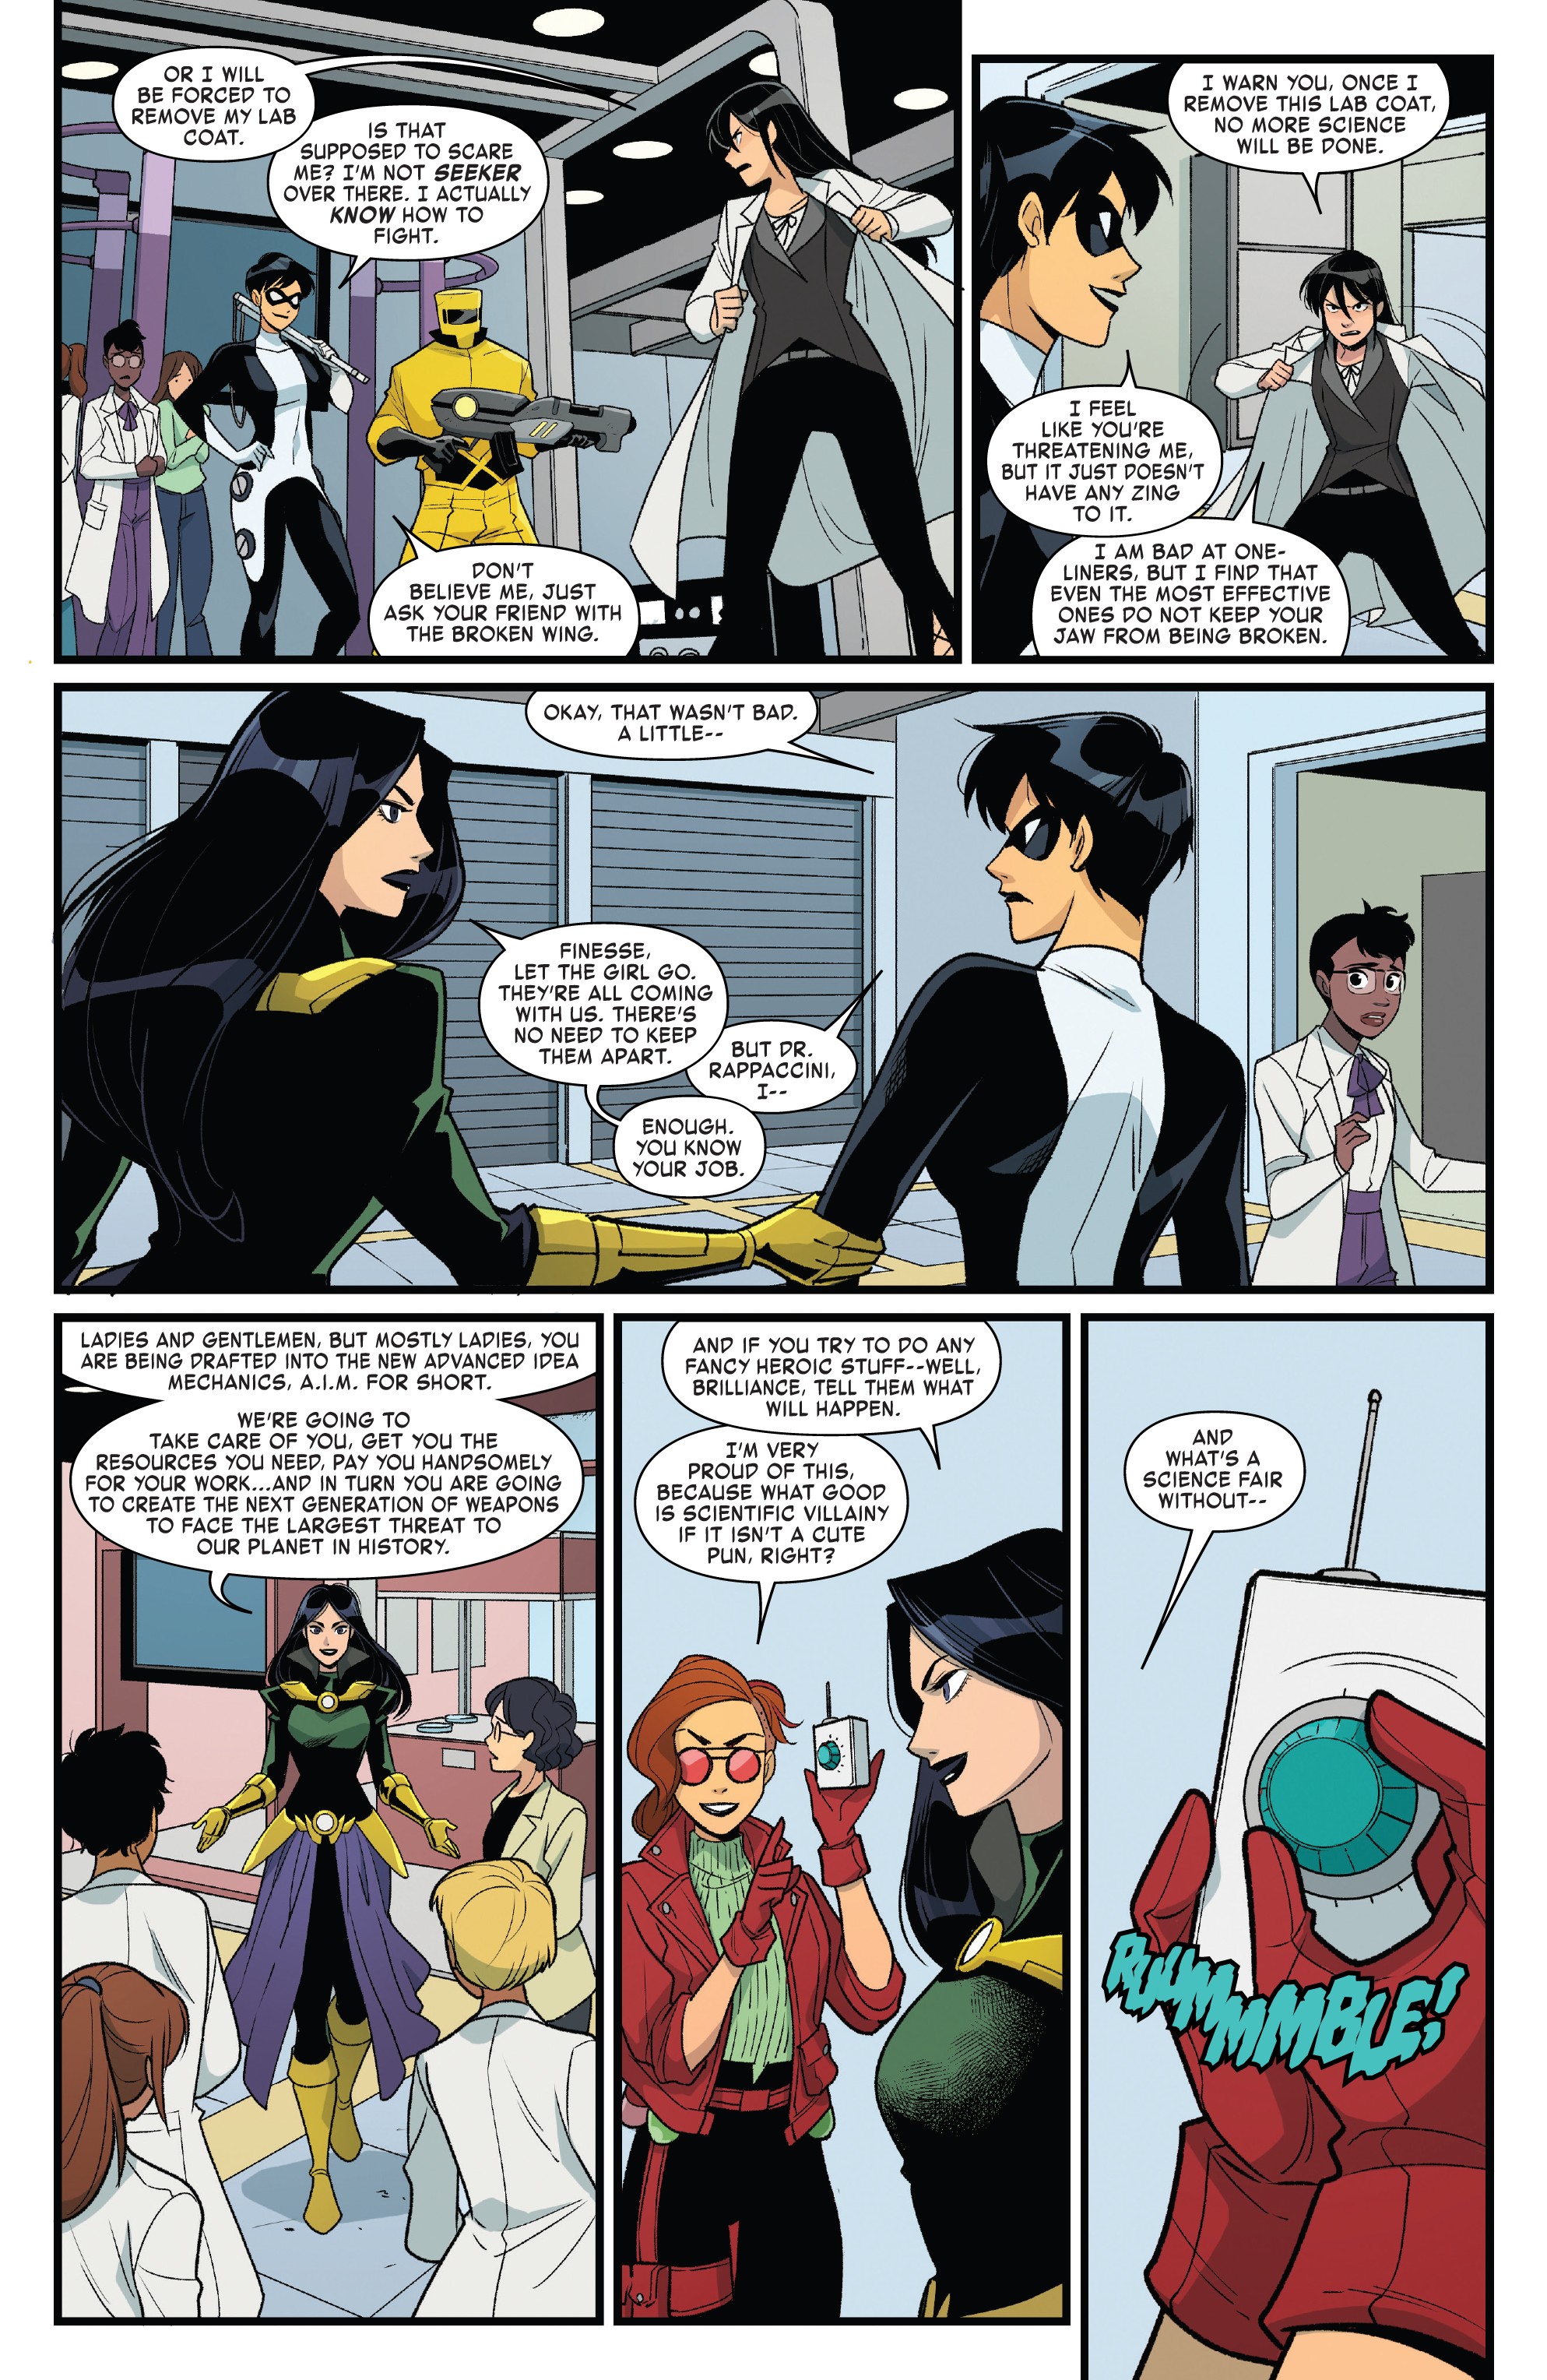 The Unstoppable Wasp (2018-): Chapter 9 - Page 5